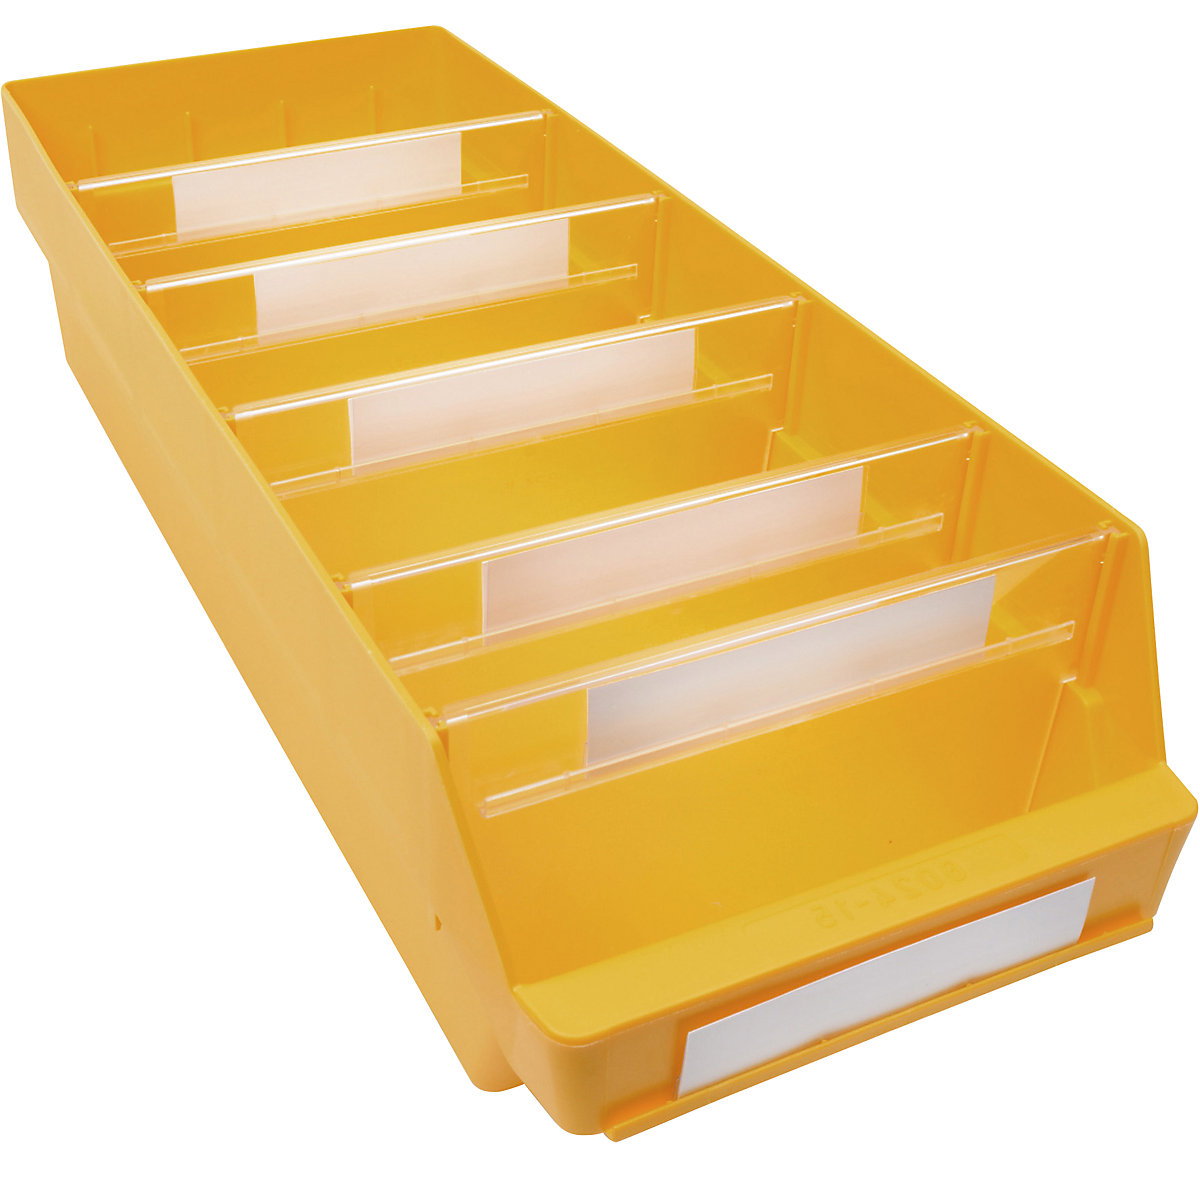 Shelf bin made of highly impact resistant polypropylene – STEMO, yellow, LxWxH 600 x 240 x 150 mm, pack of 10-14